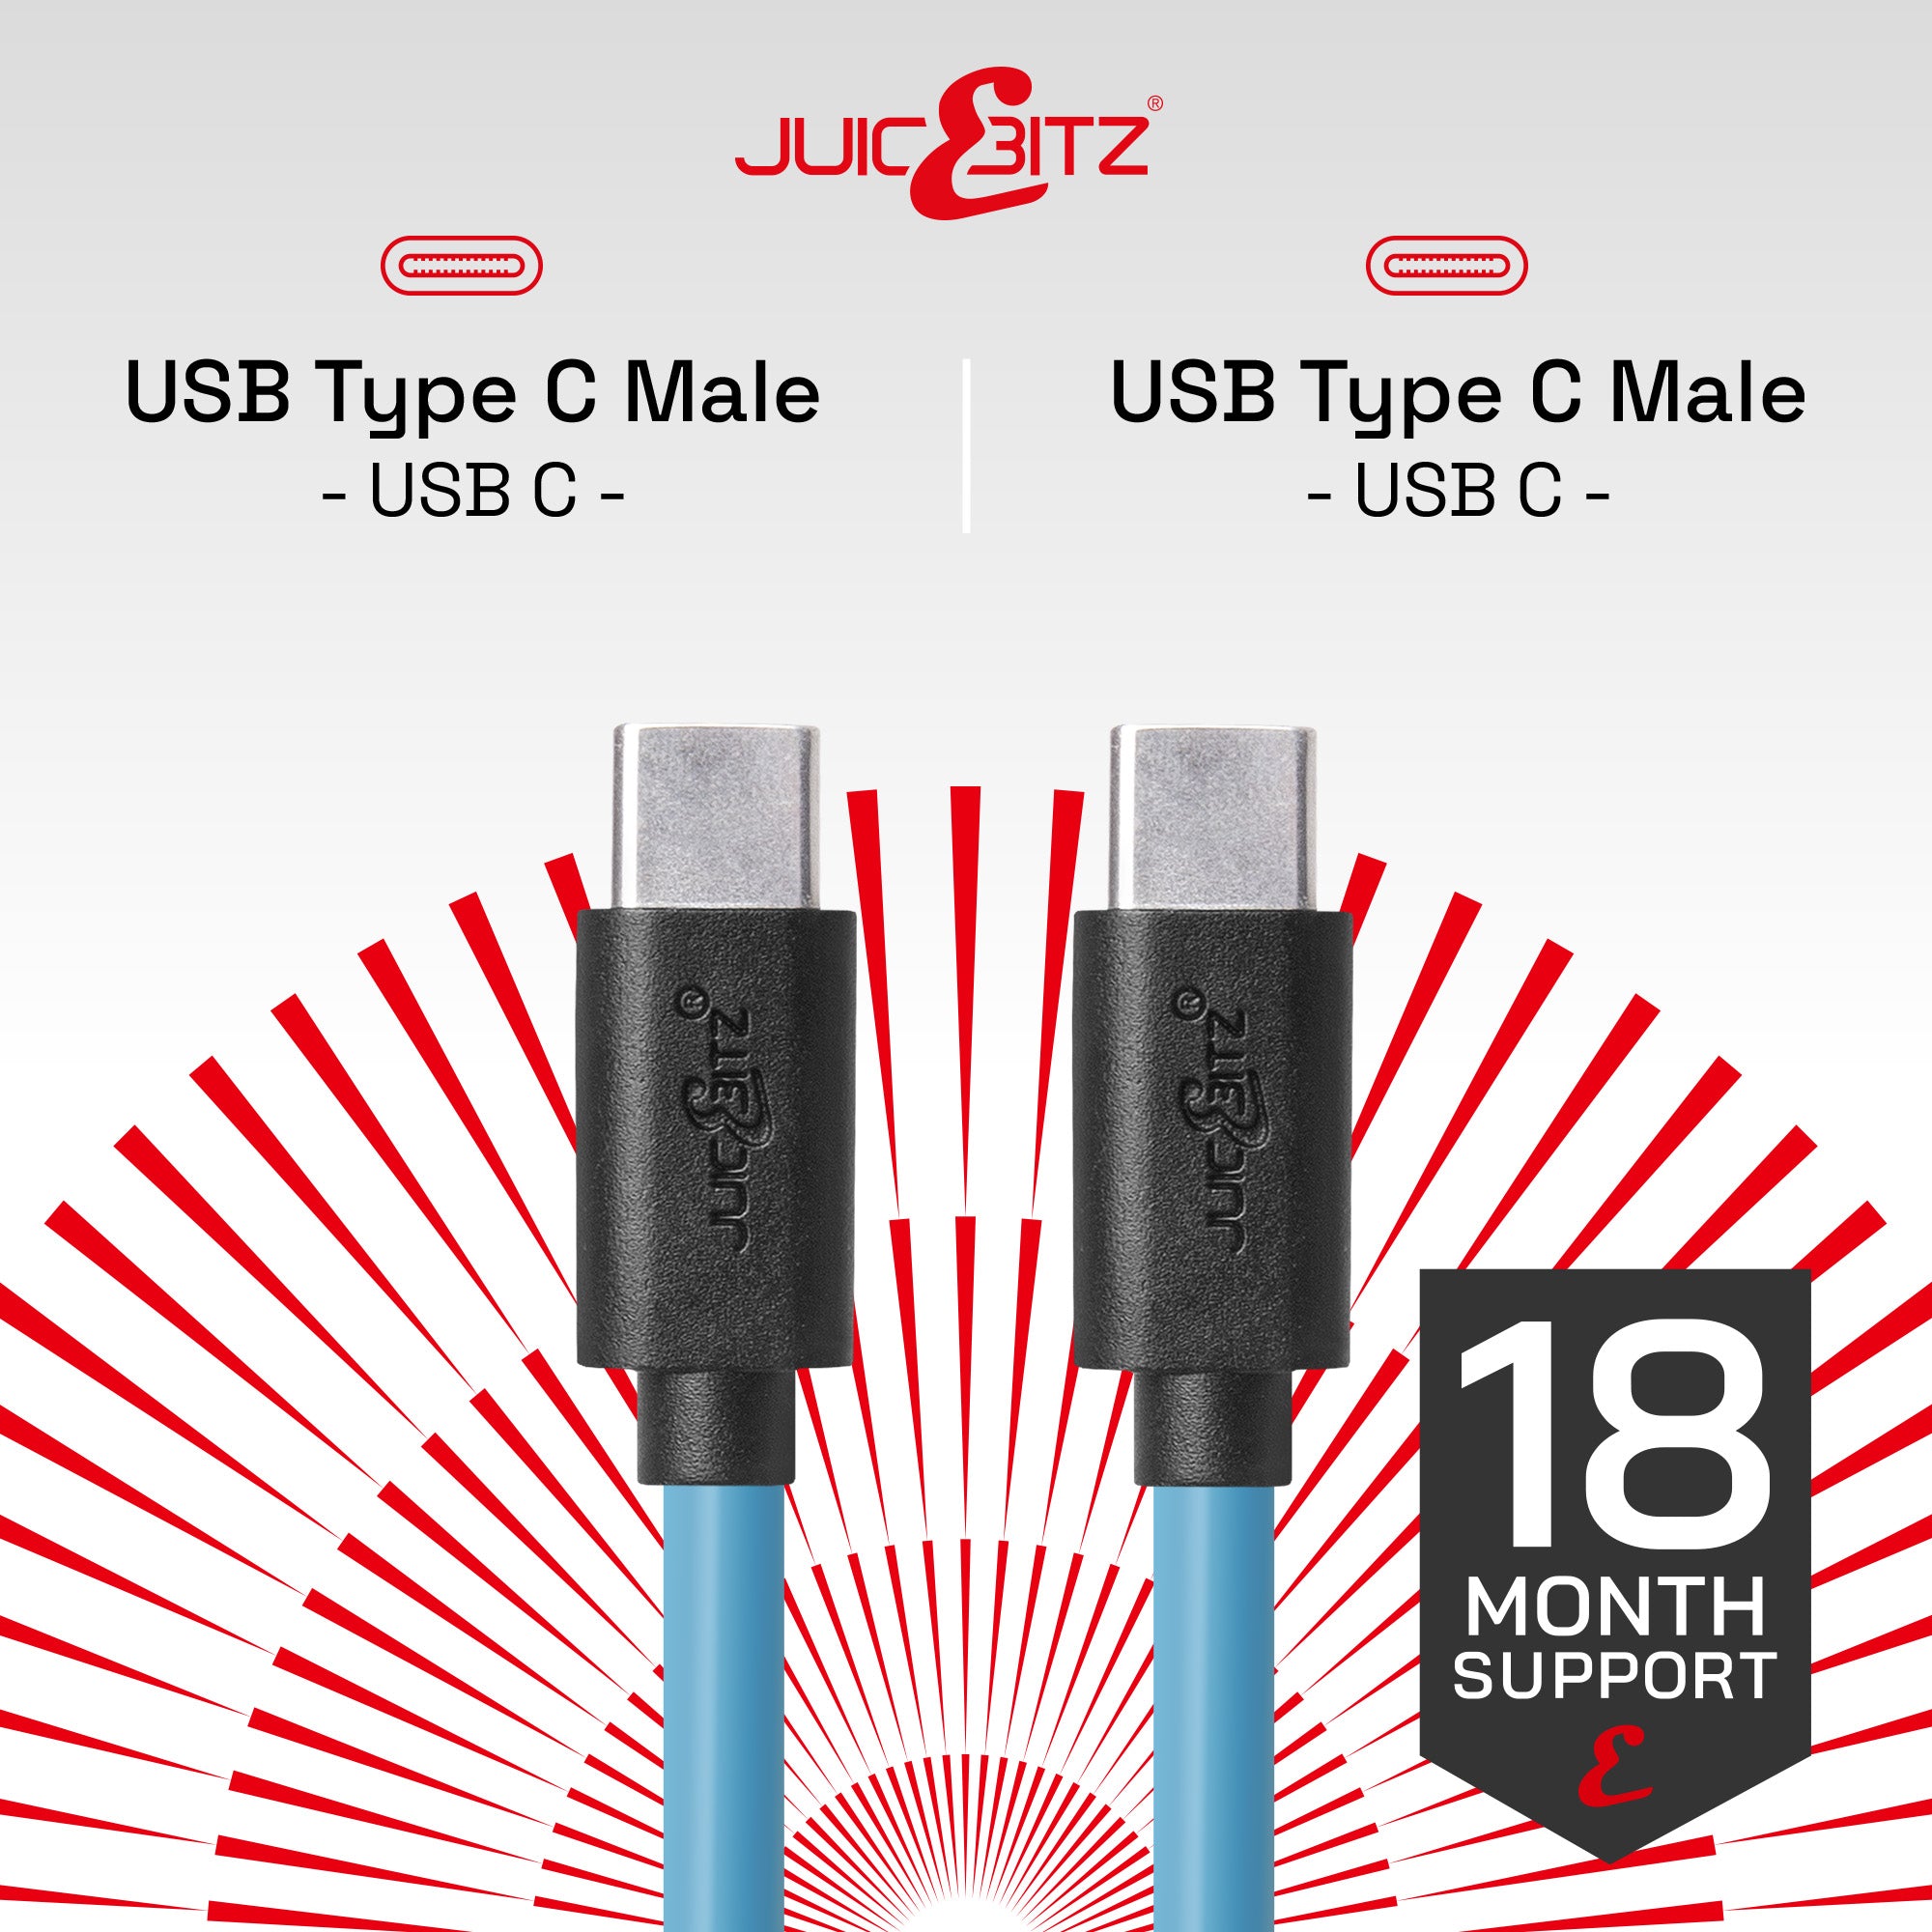 USB-C to USB-C 3A Charger Cable USB 2.0 Data Transfer Lead - Blue